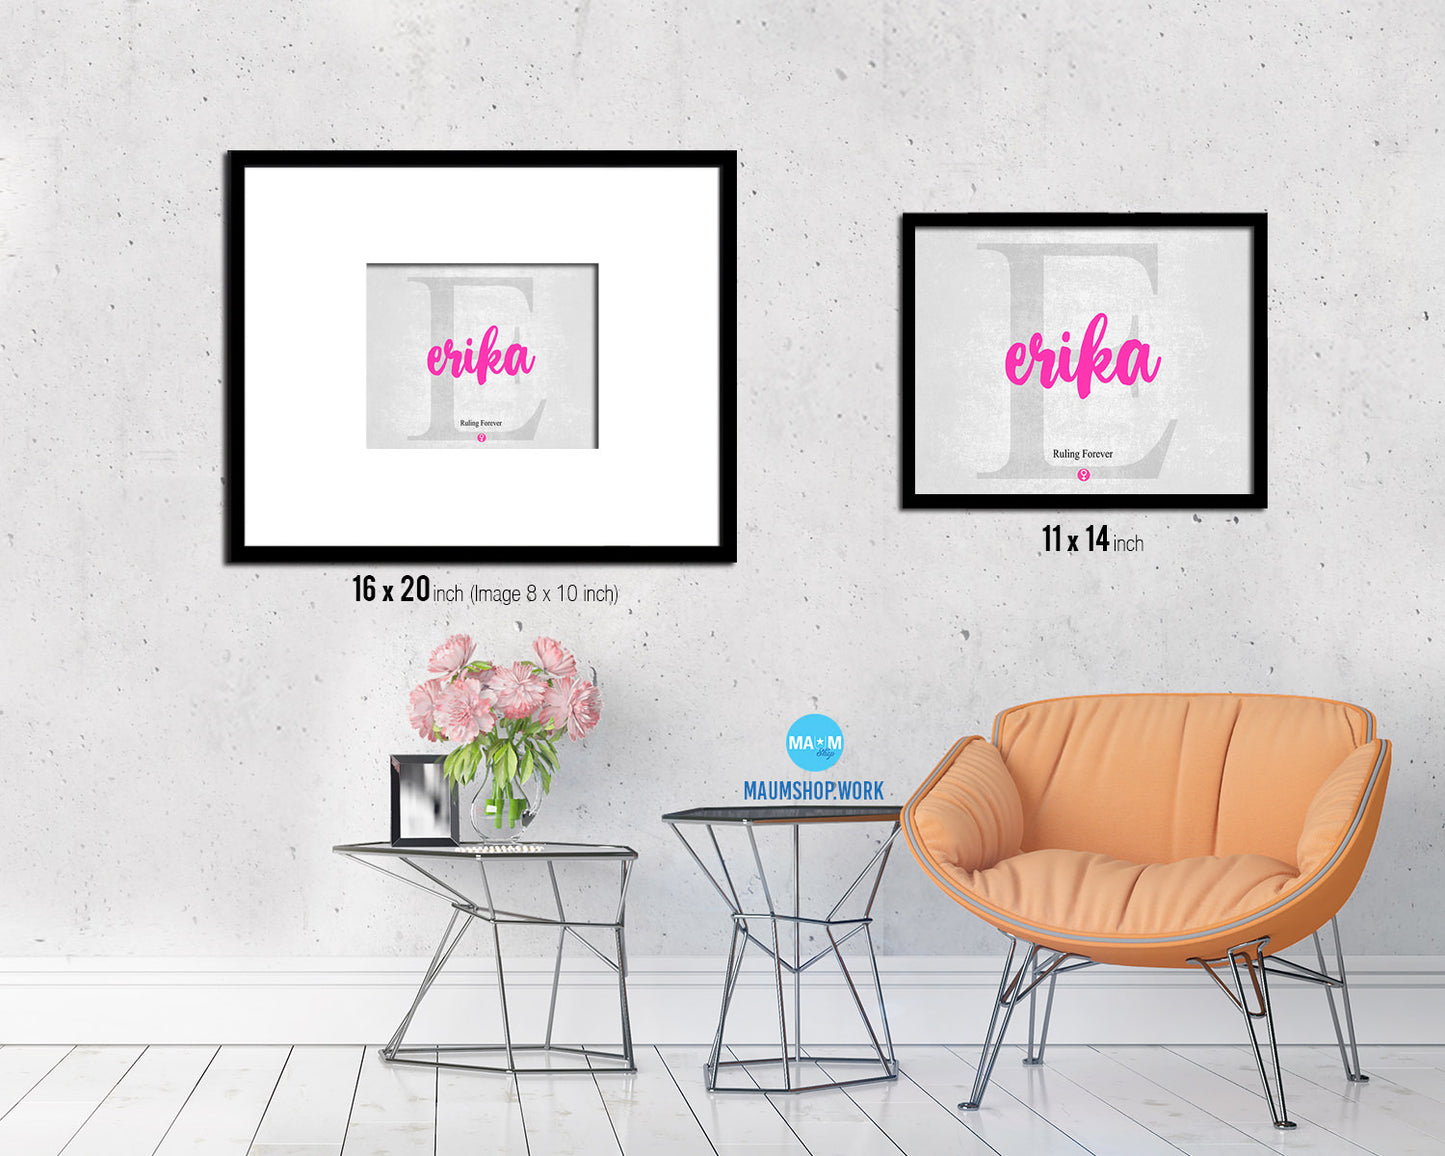 Erika Personalized Biblical Name Plate Art Framed Print Kids Baby Room Wall Decor Gifts